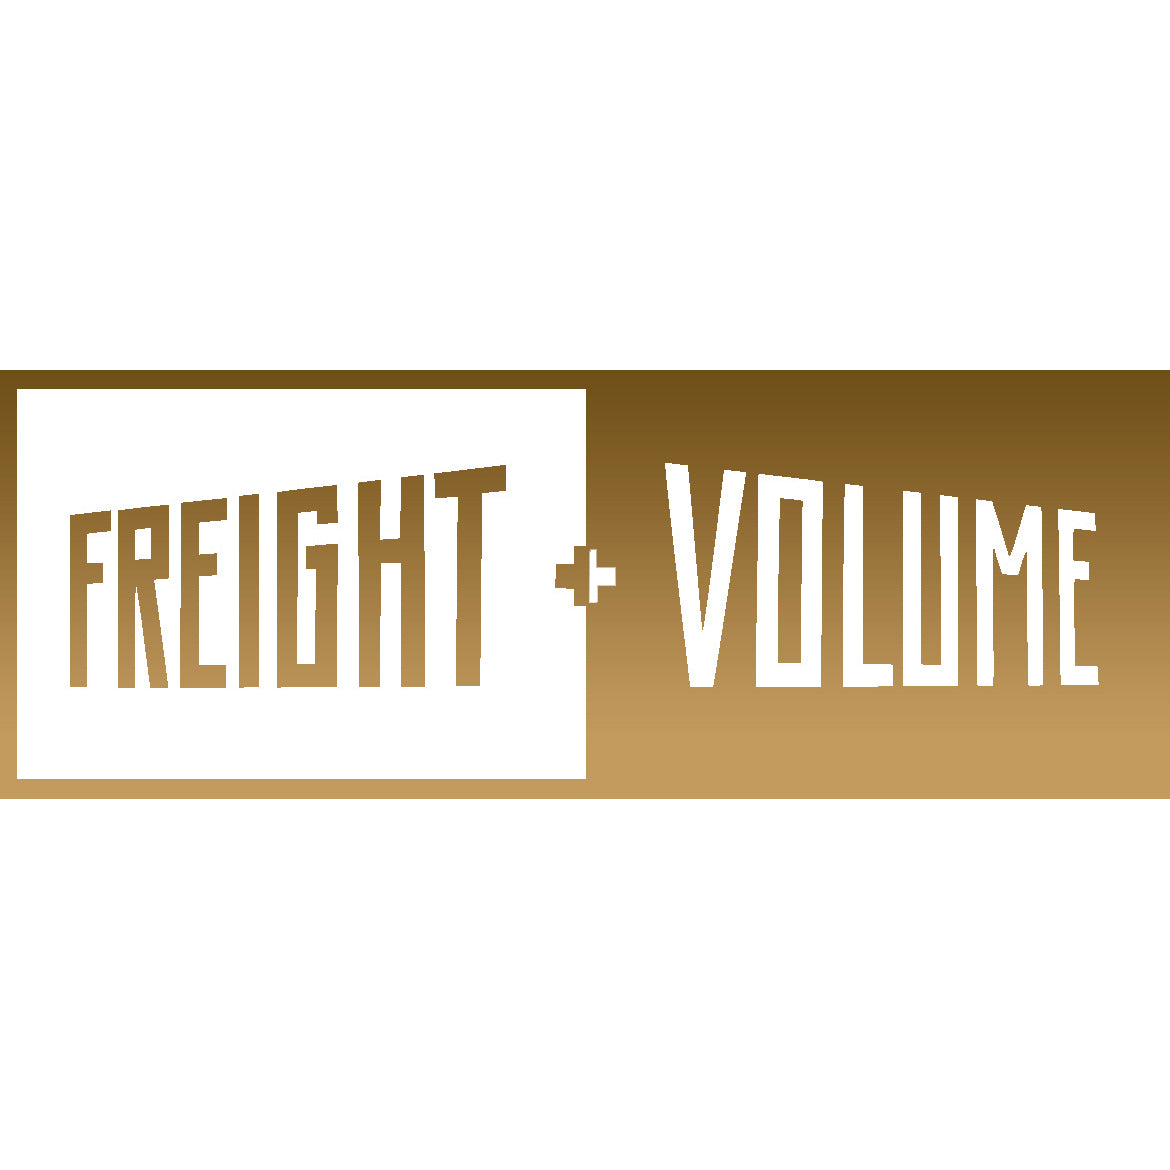 Freight and Volume